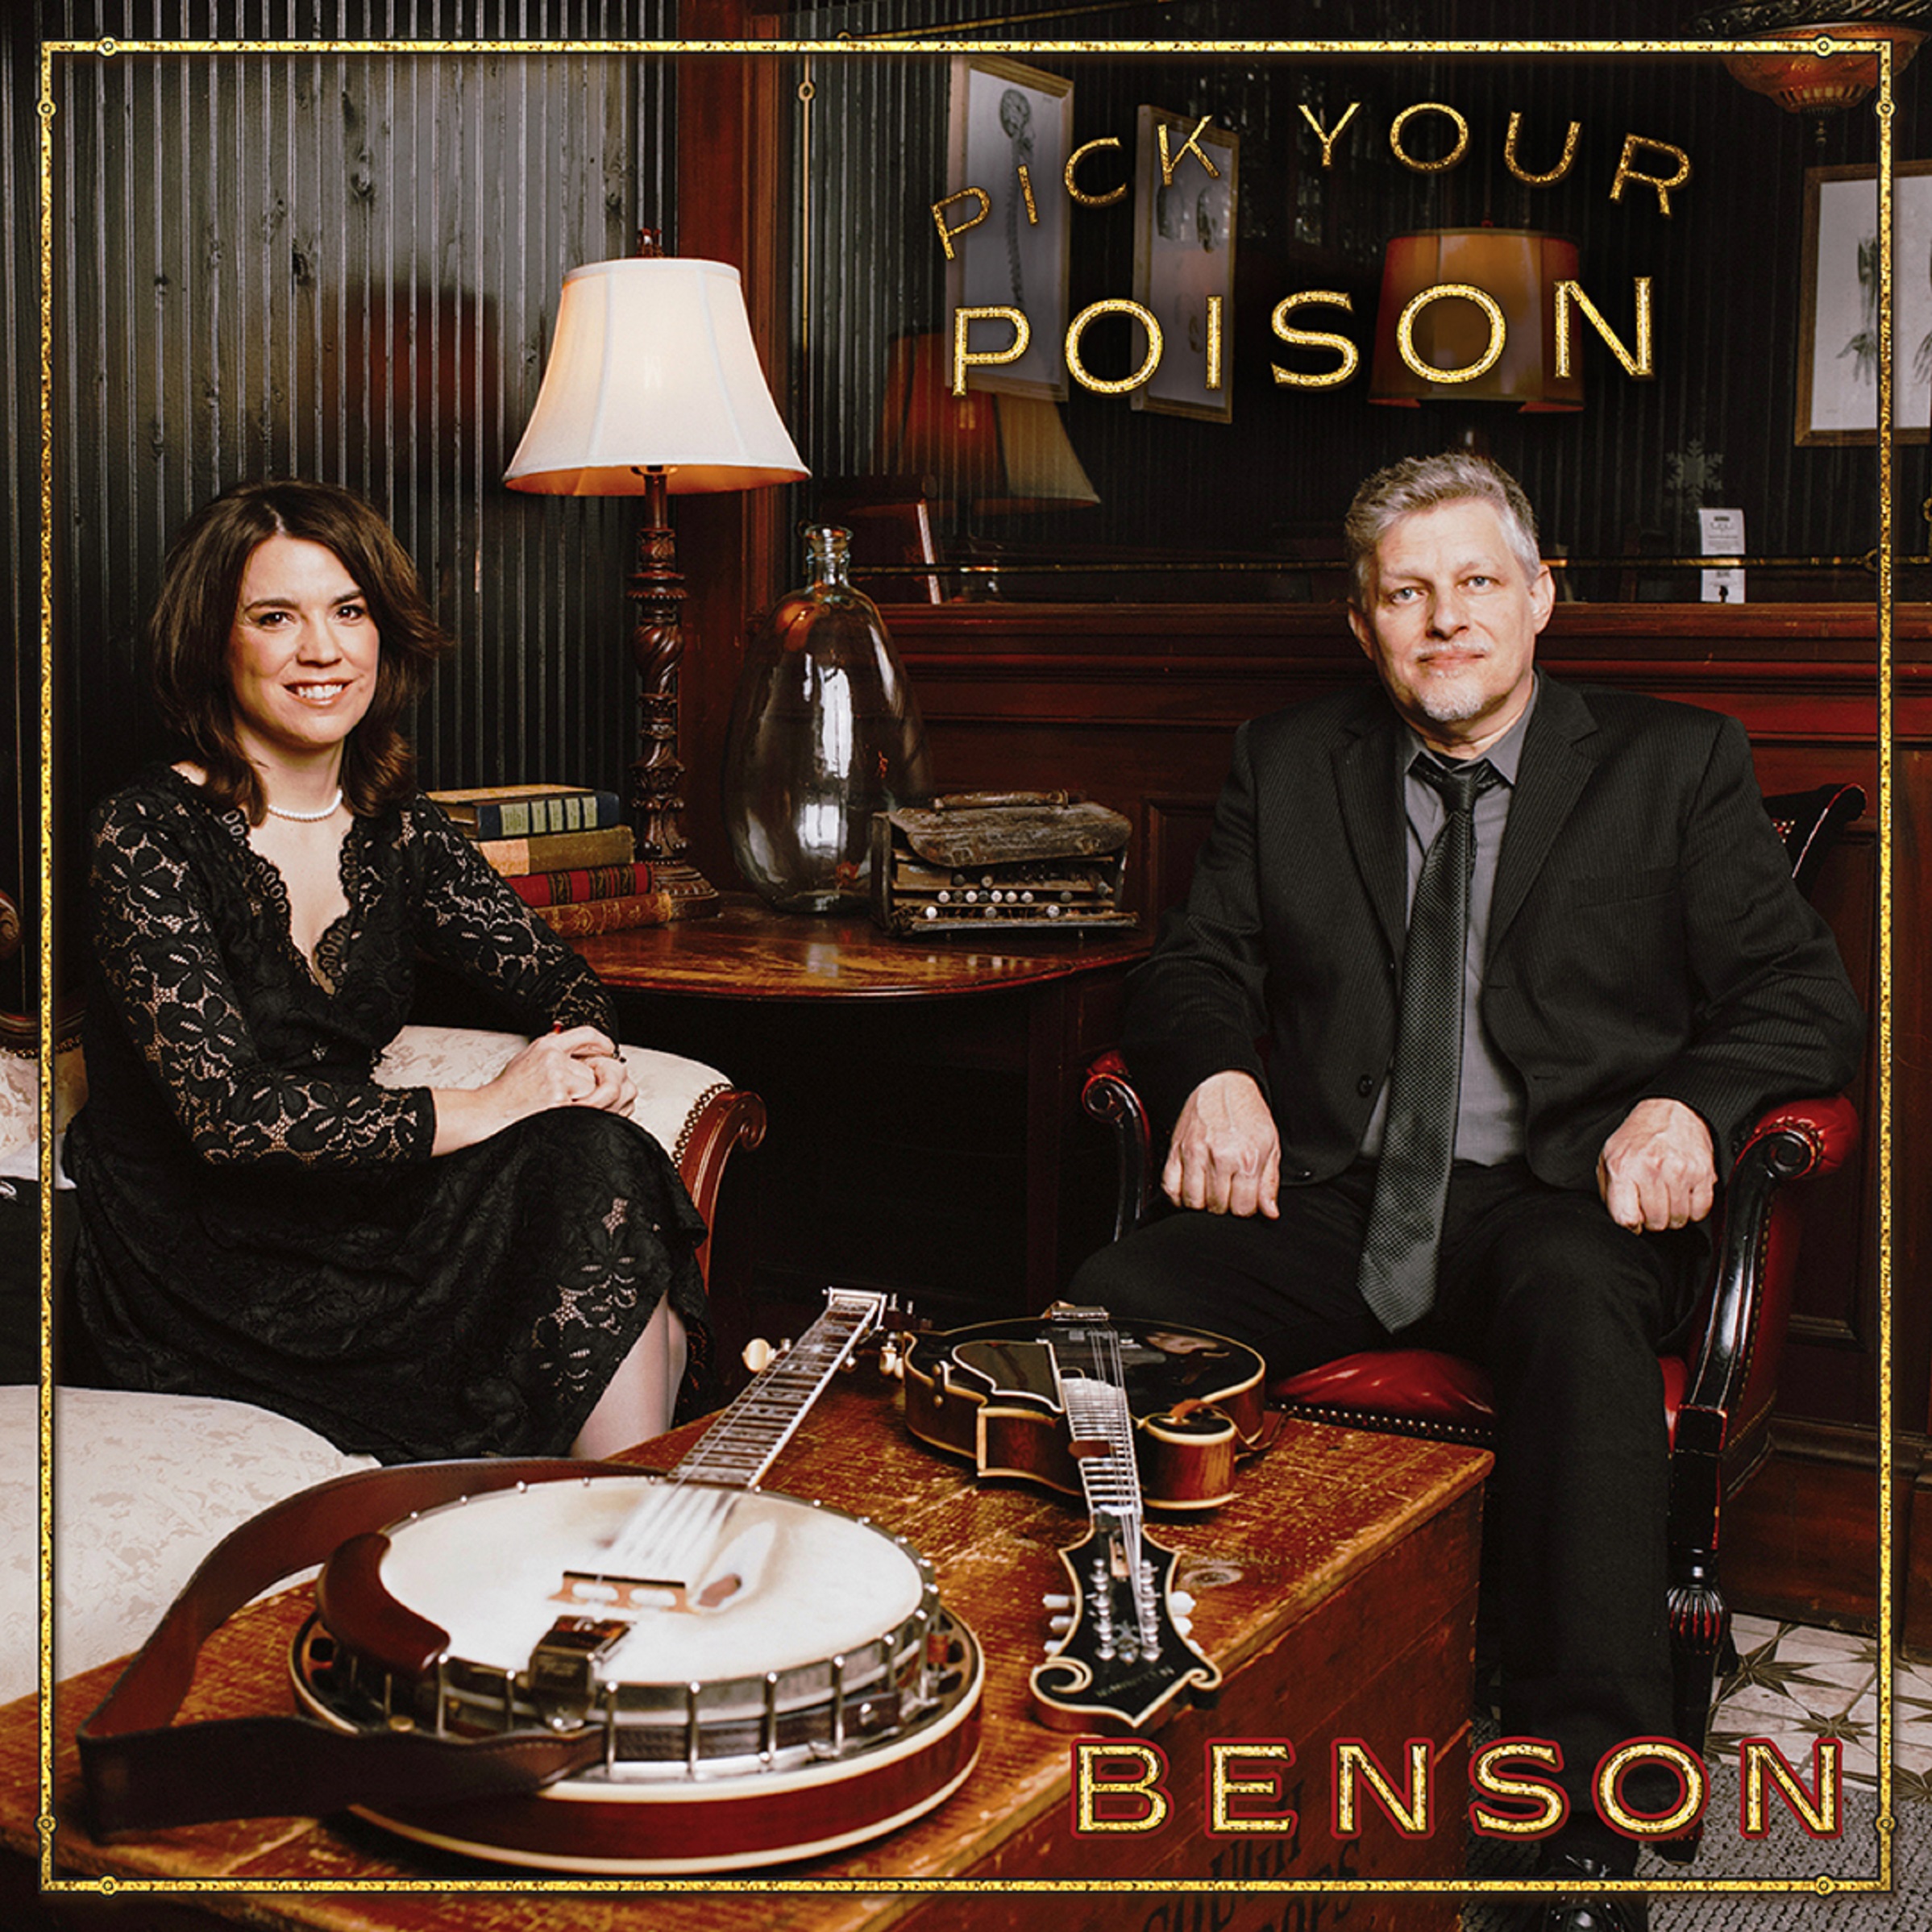 Benson’s thoughtful artistry is on display with upcoming album, Pick Your Poison